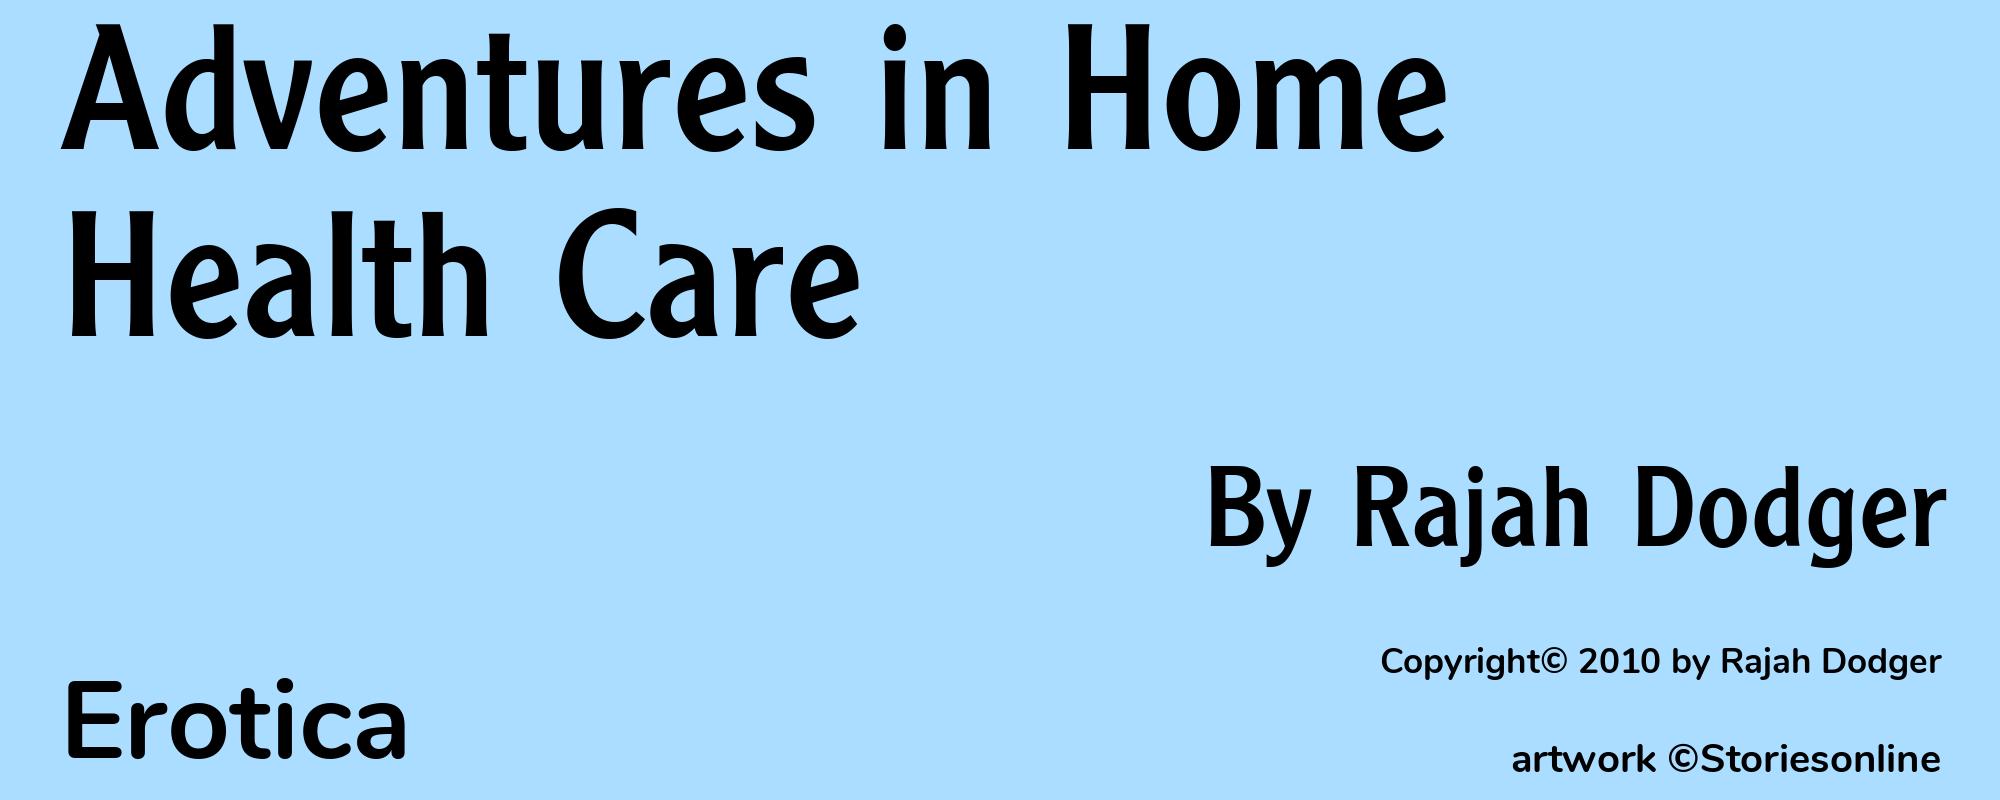 Adventures in Home Health Care - Cover